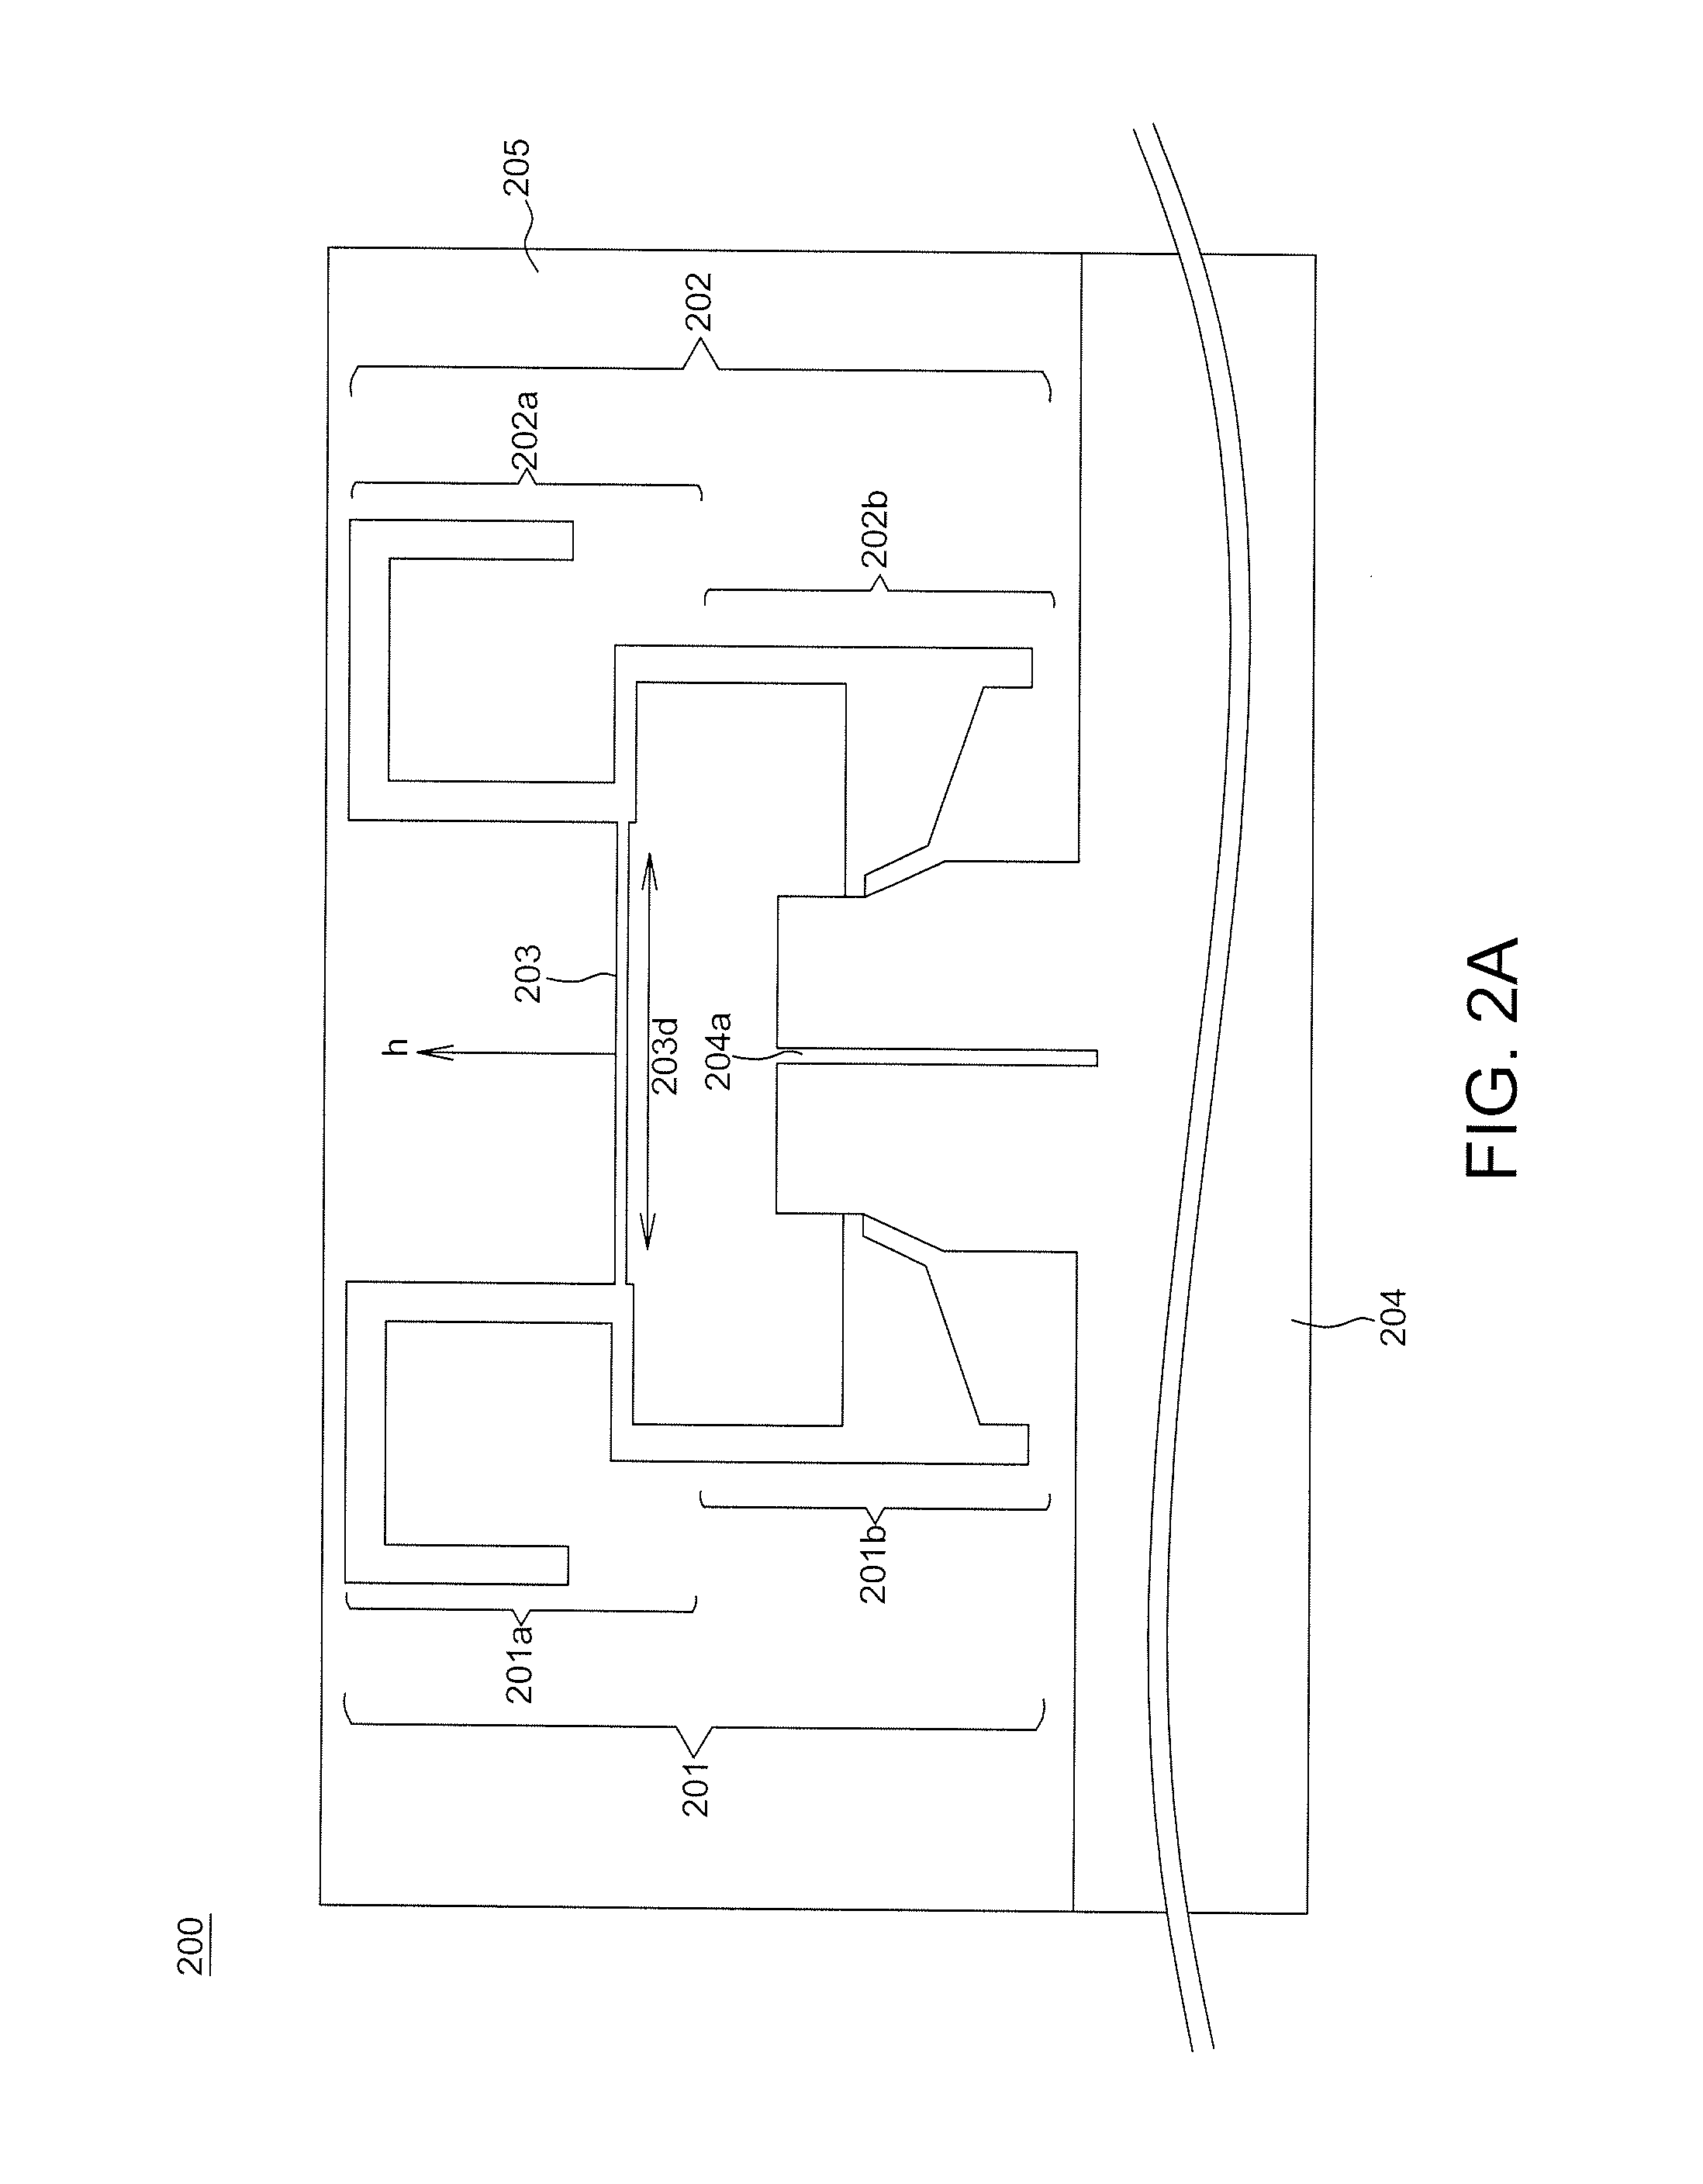 Dualband  antenna  with  isolation  enhanced and method  thereof